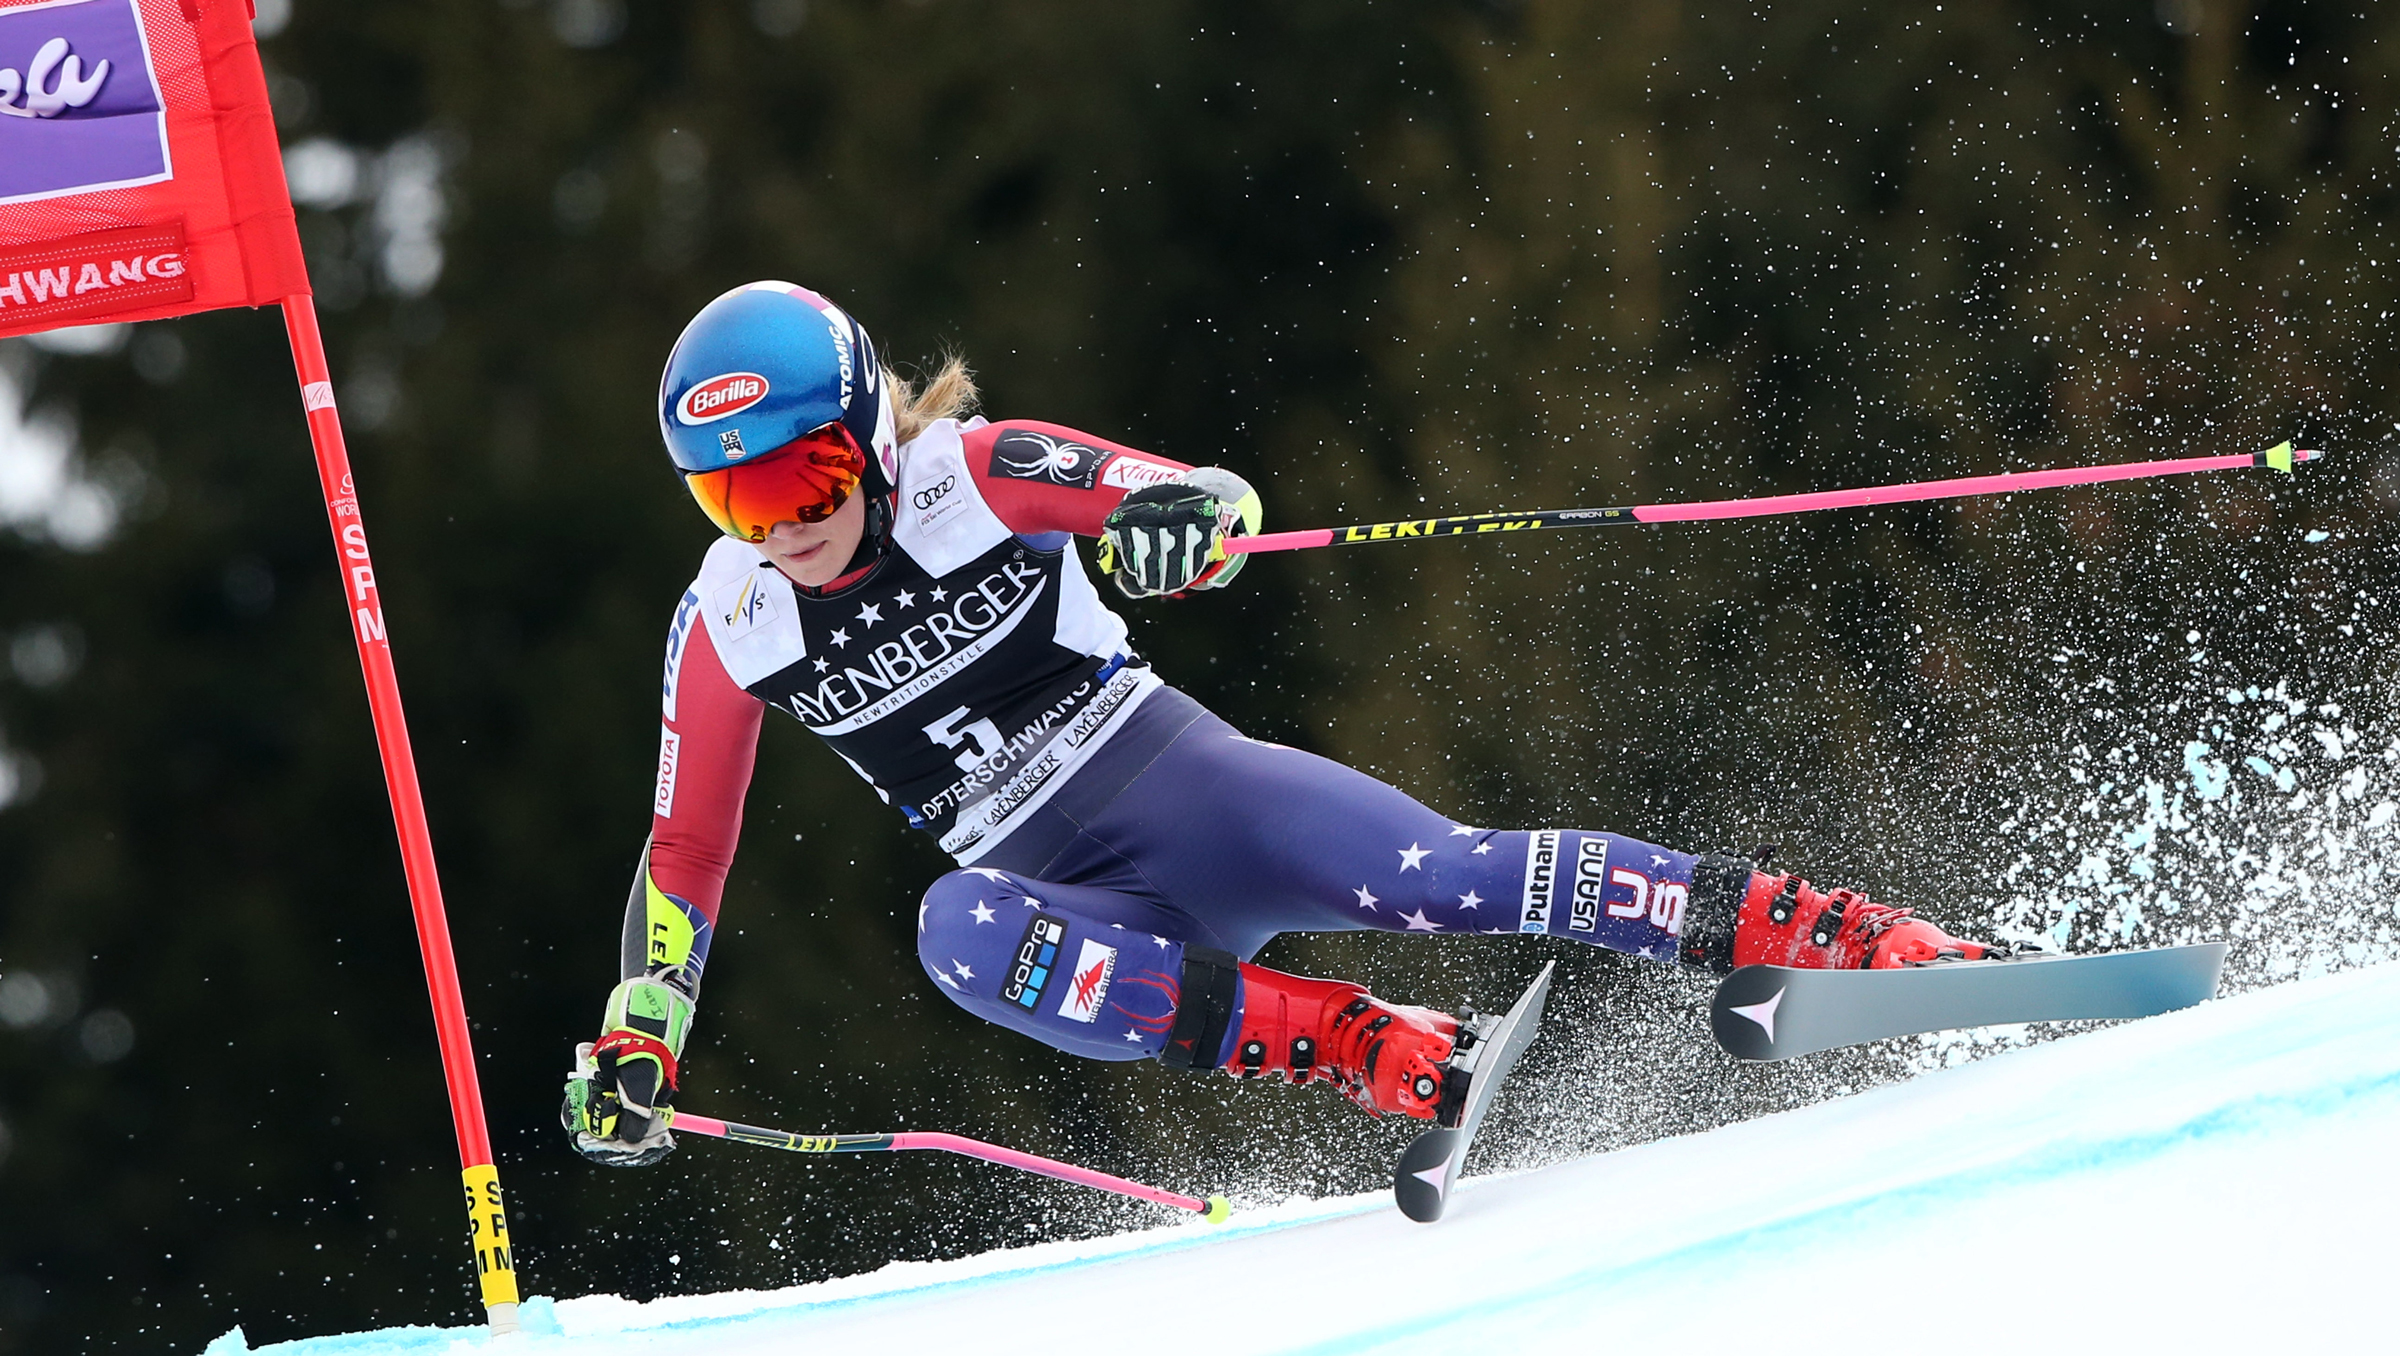 Mikaela Shiffrin finished third in Friday's FIS Ski World Cup giant slalom in Ofterschwang, Germany, and wrapped up her second-consecutive overall World Cup title. (Getty Images/Agence Zoom - Christophe Pallot)